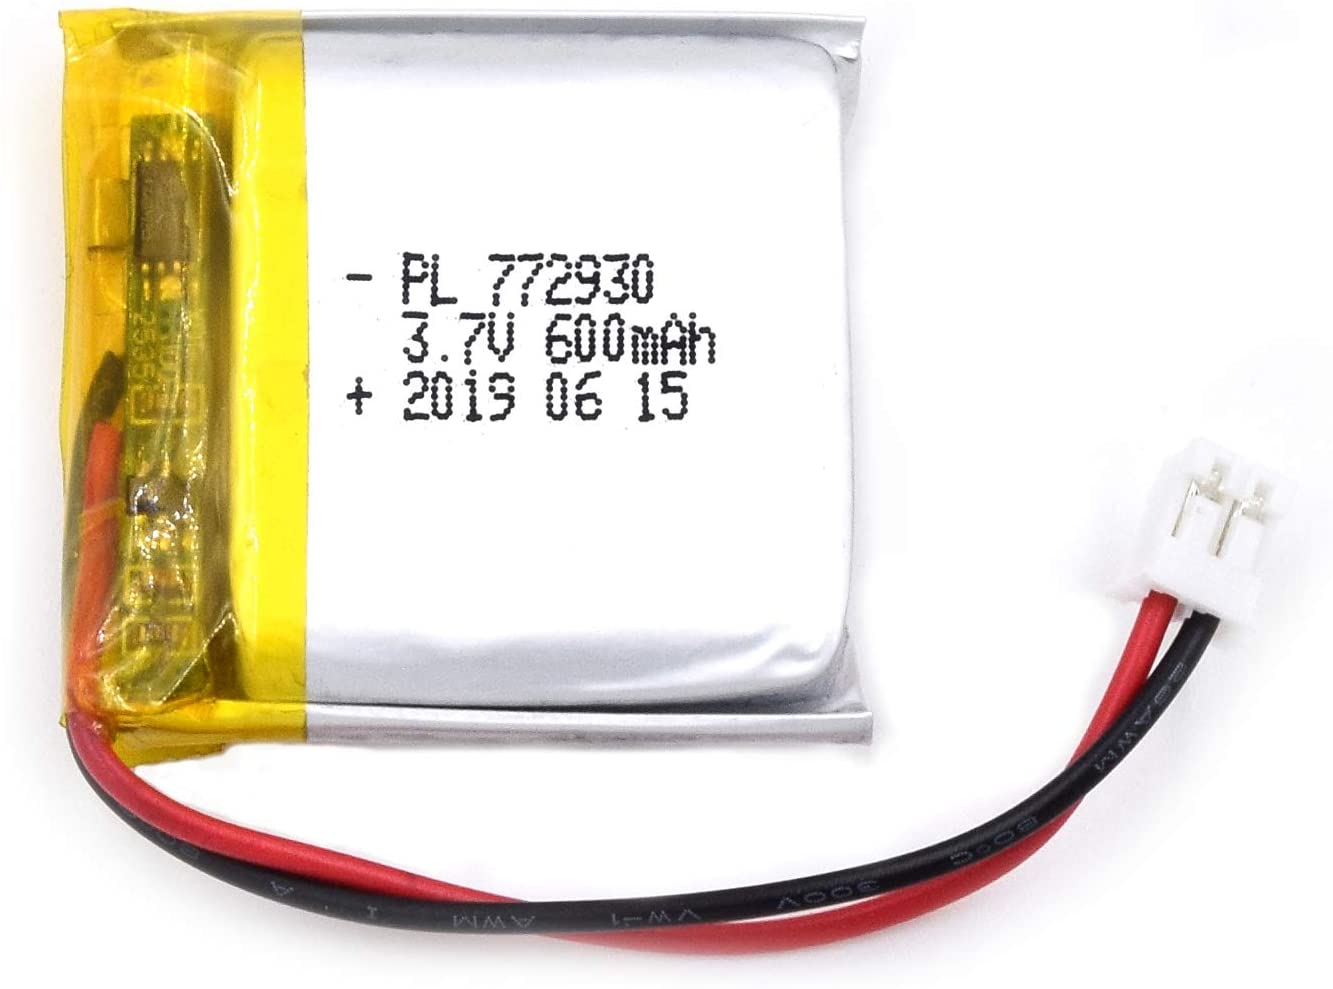 YDL 3.7V 600mAh 772930 Rechargeable Lithium Polymer Battery